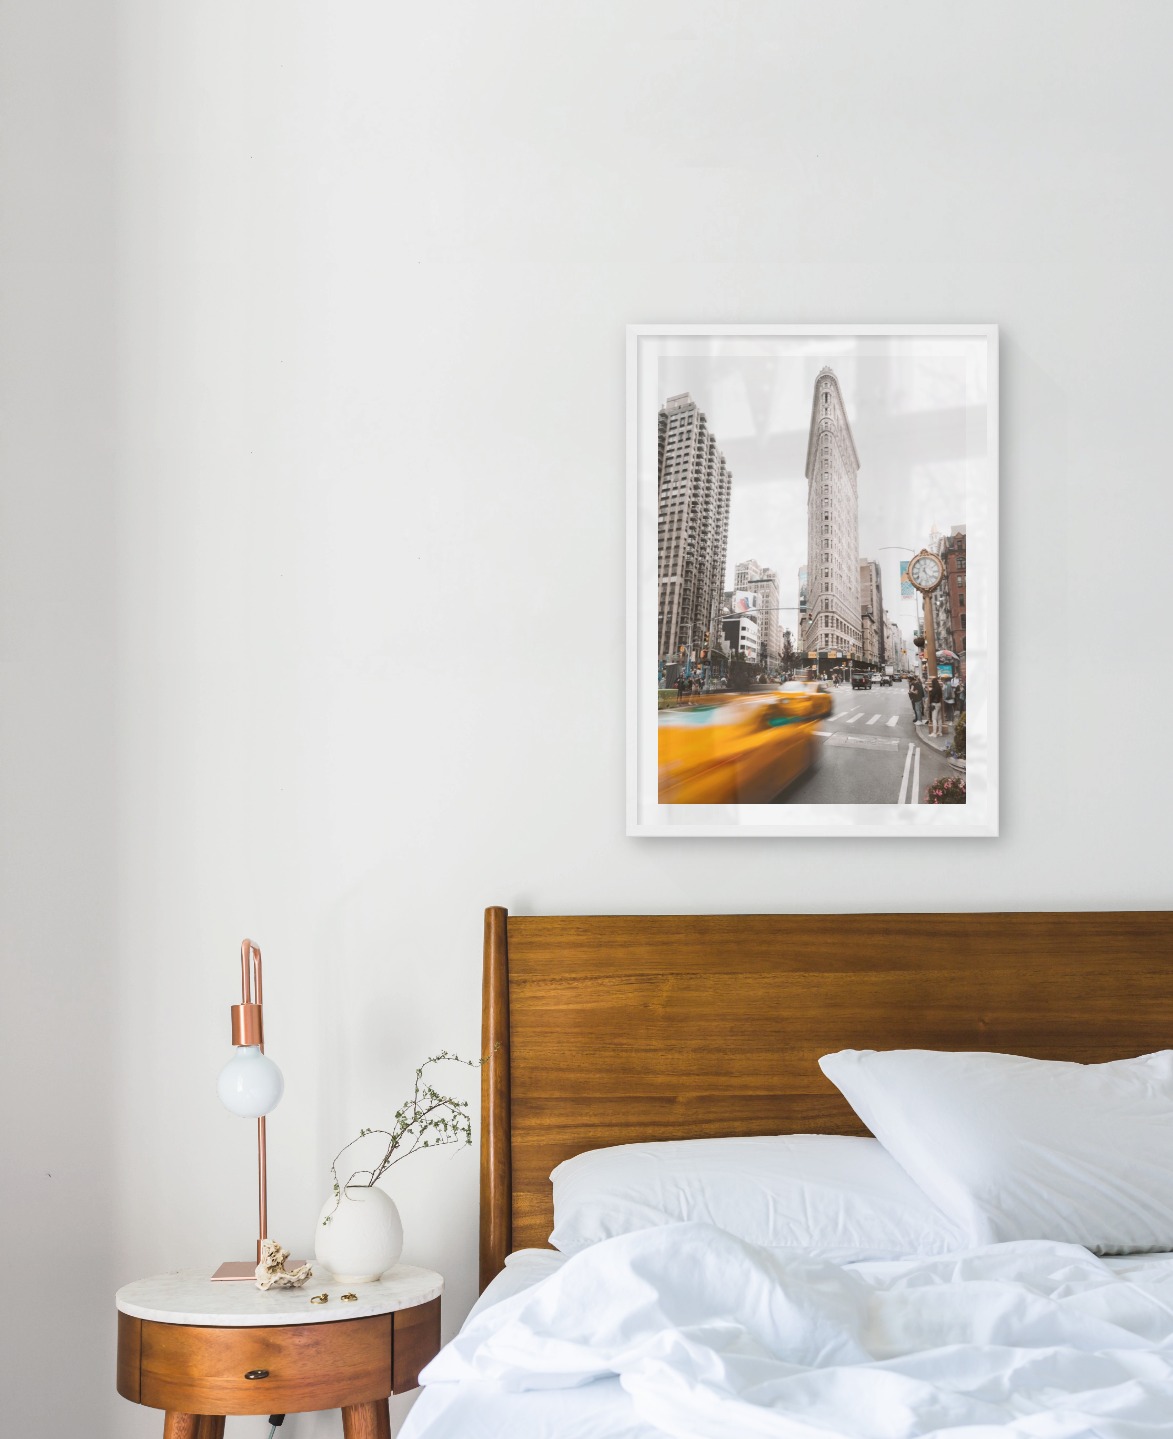 Gallery wall with picture frame in white in size 50x70 with print "Yellow taxis in town"